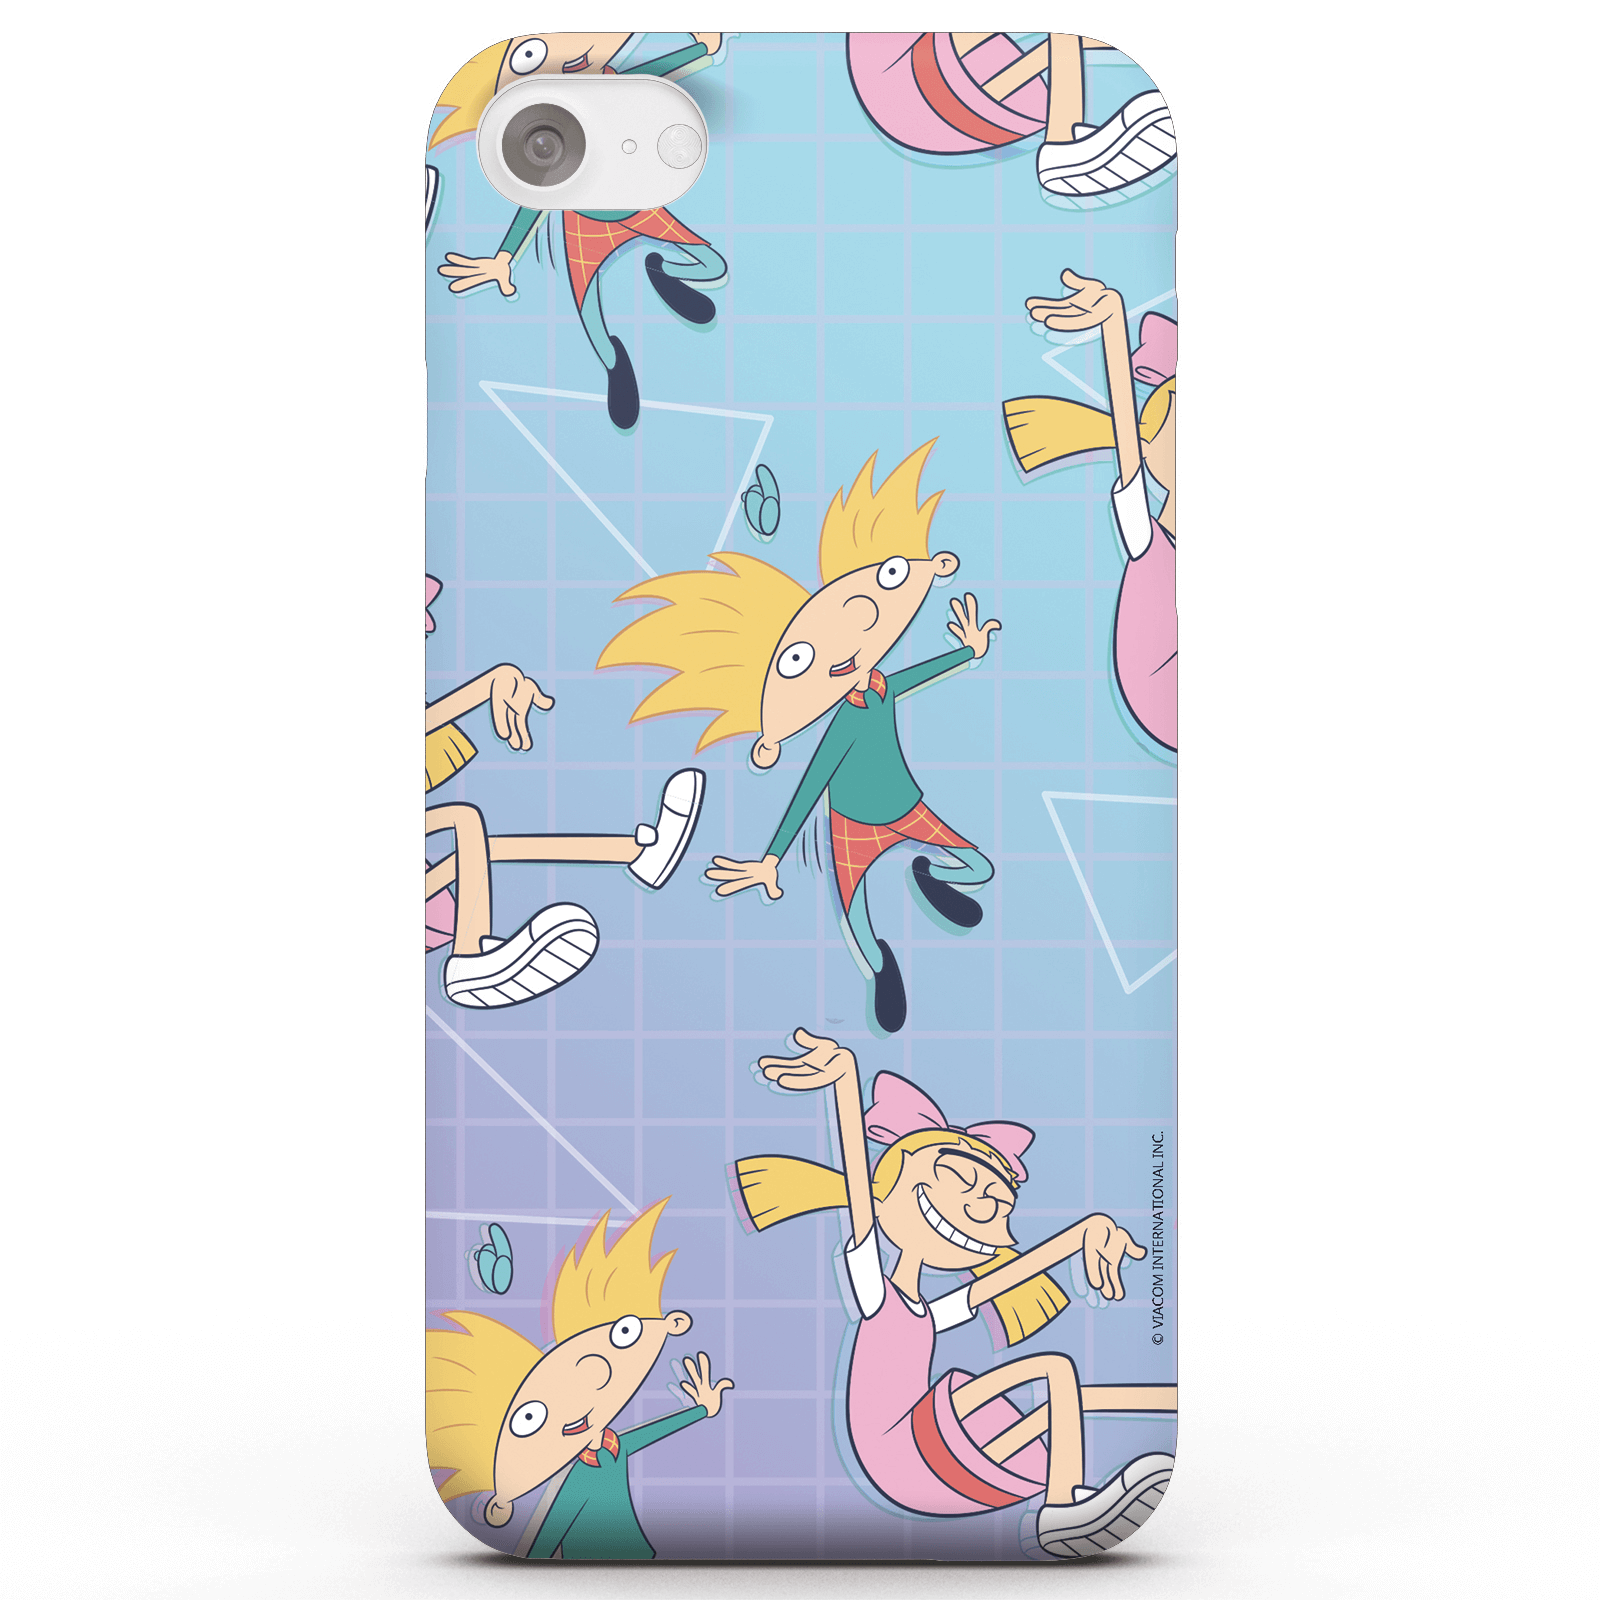 Nickelodeon Hey Arnold Phone Case for iPhone and Android - iPhone 5/5s - Snap Case - Matte